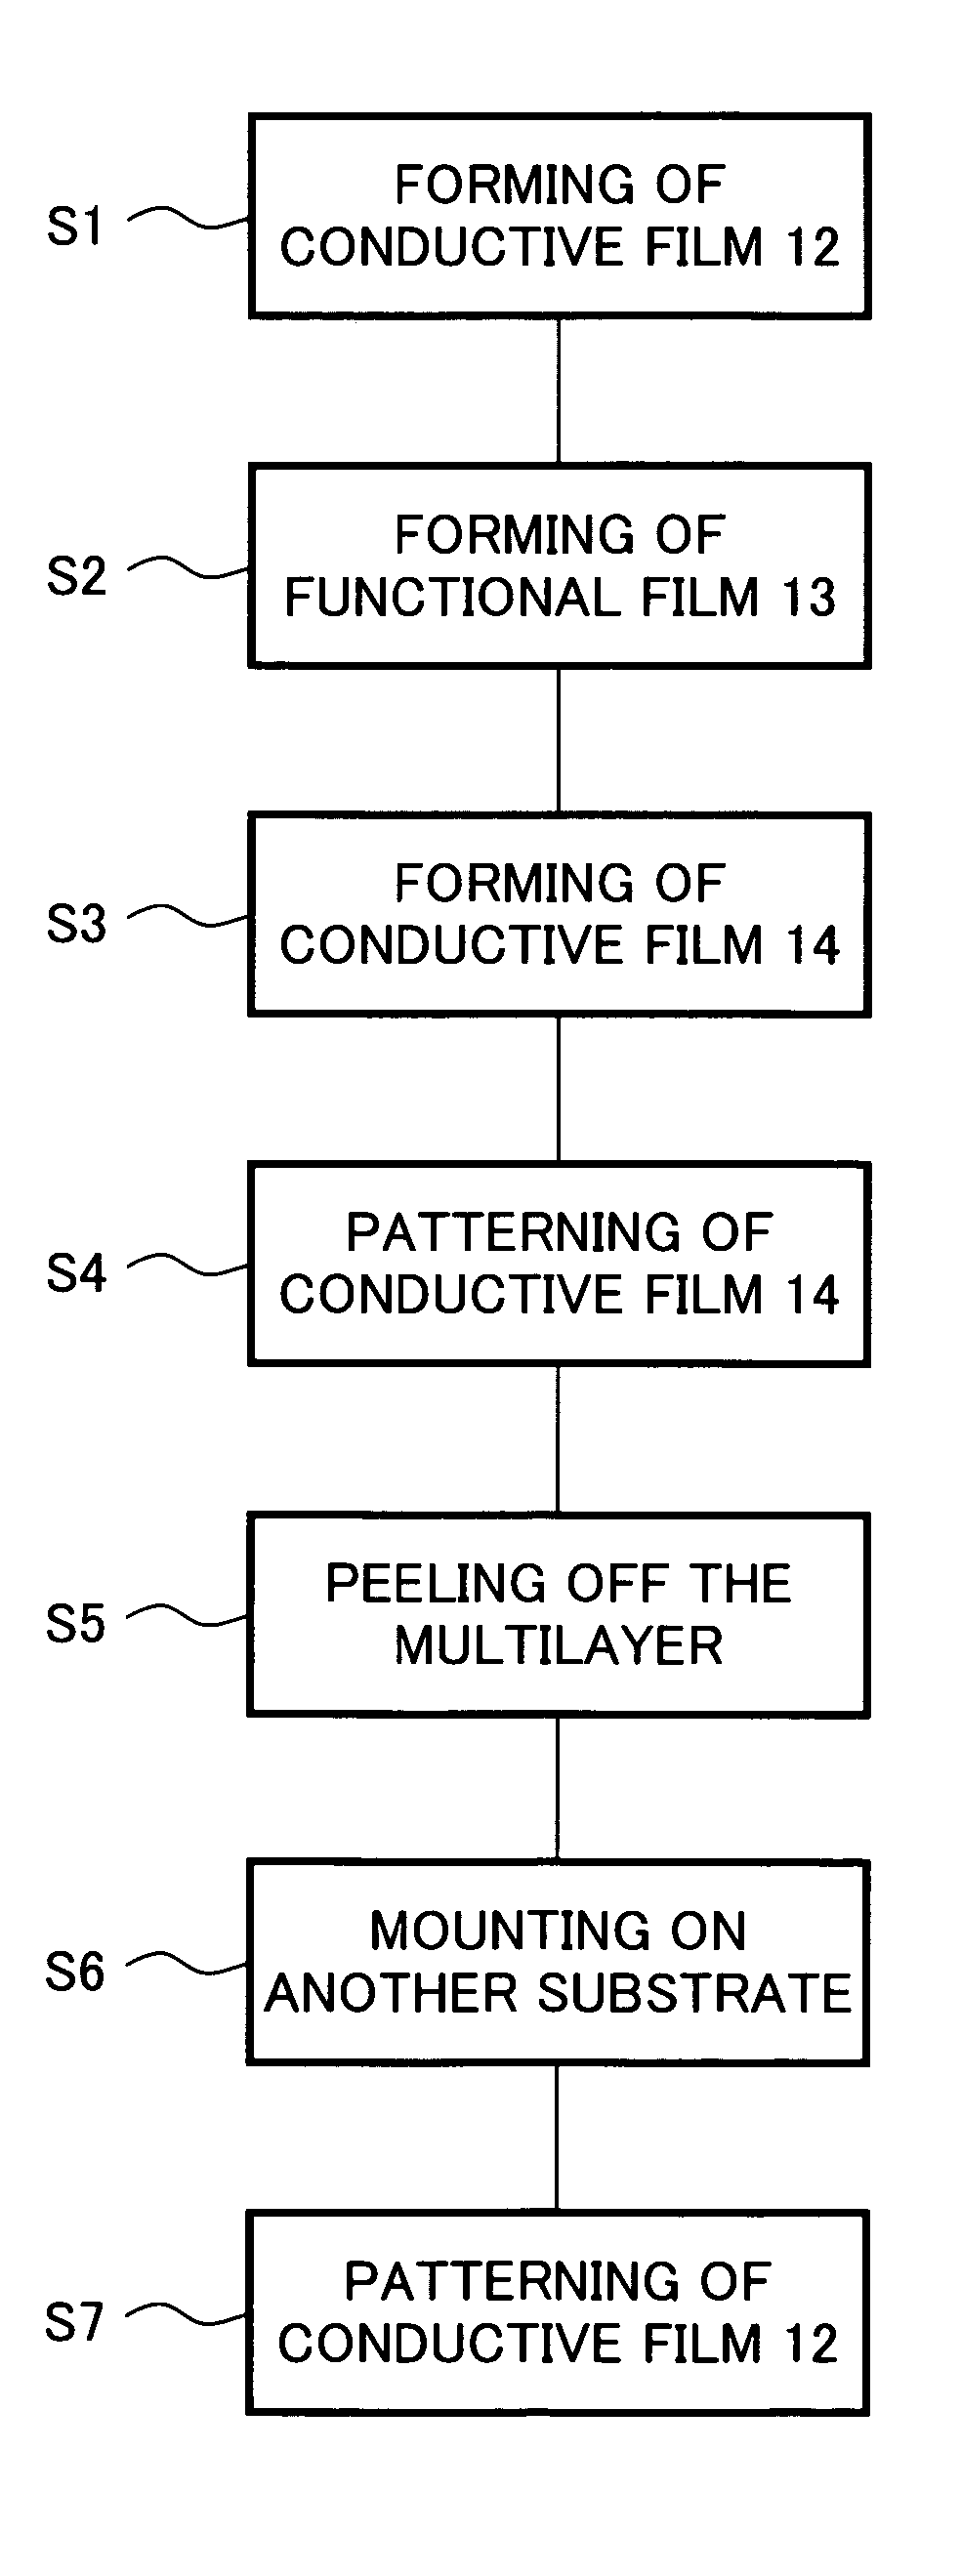 Component for fabricating an electronic device and method of fabricating an electronic device